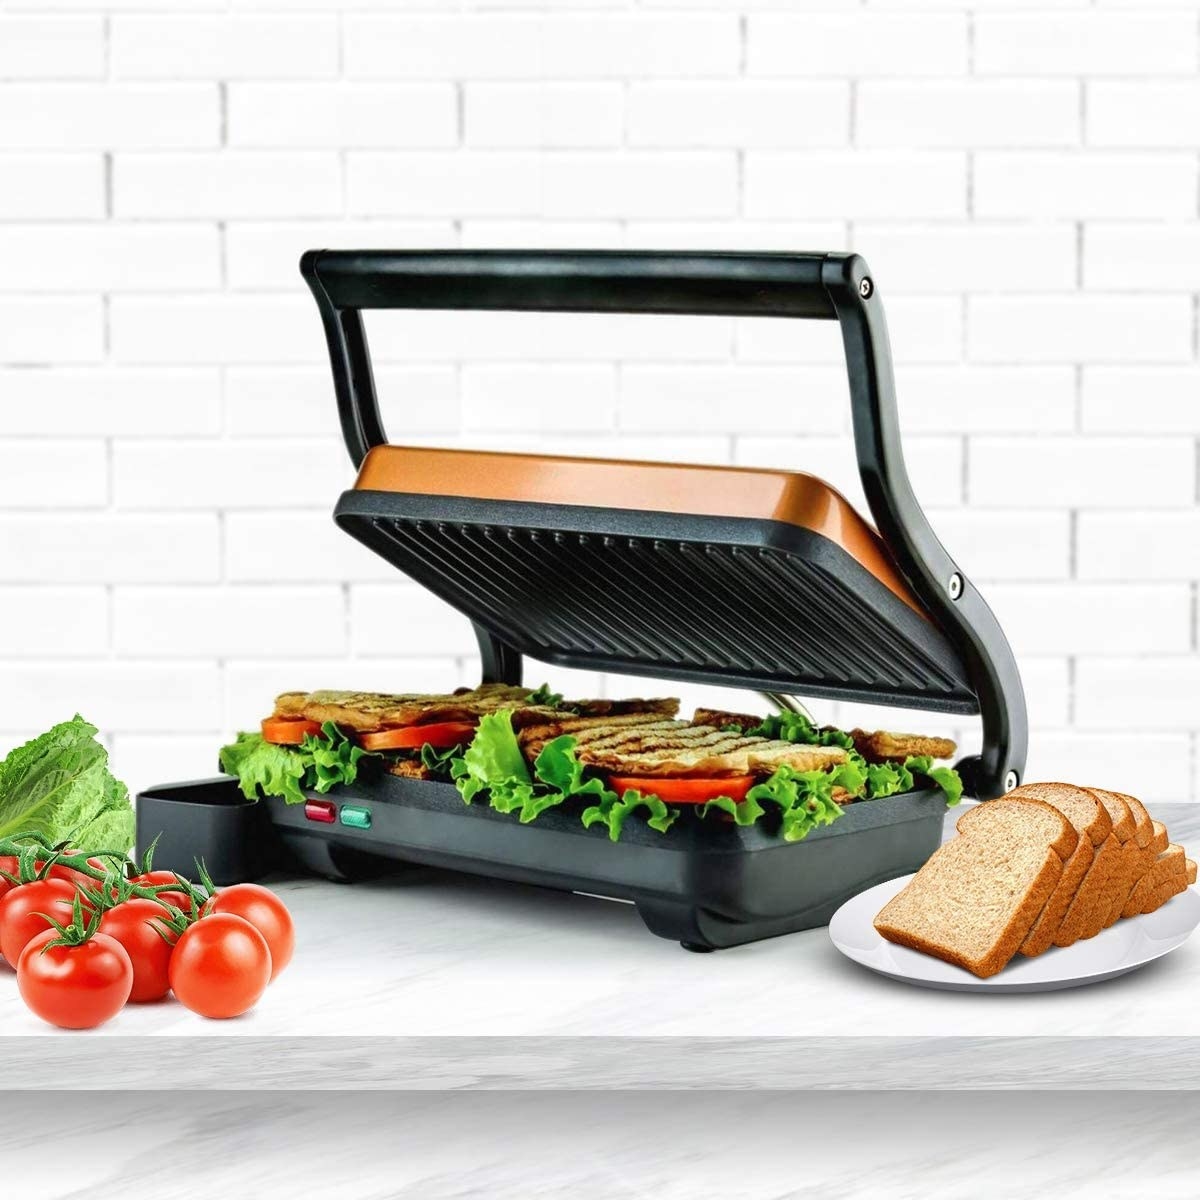 The panini press with a floating lid and a grilled sandwich inside